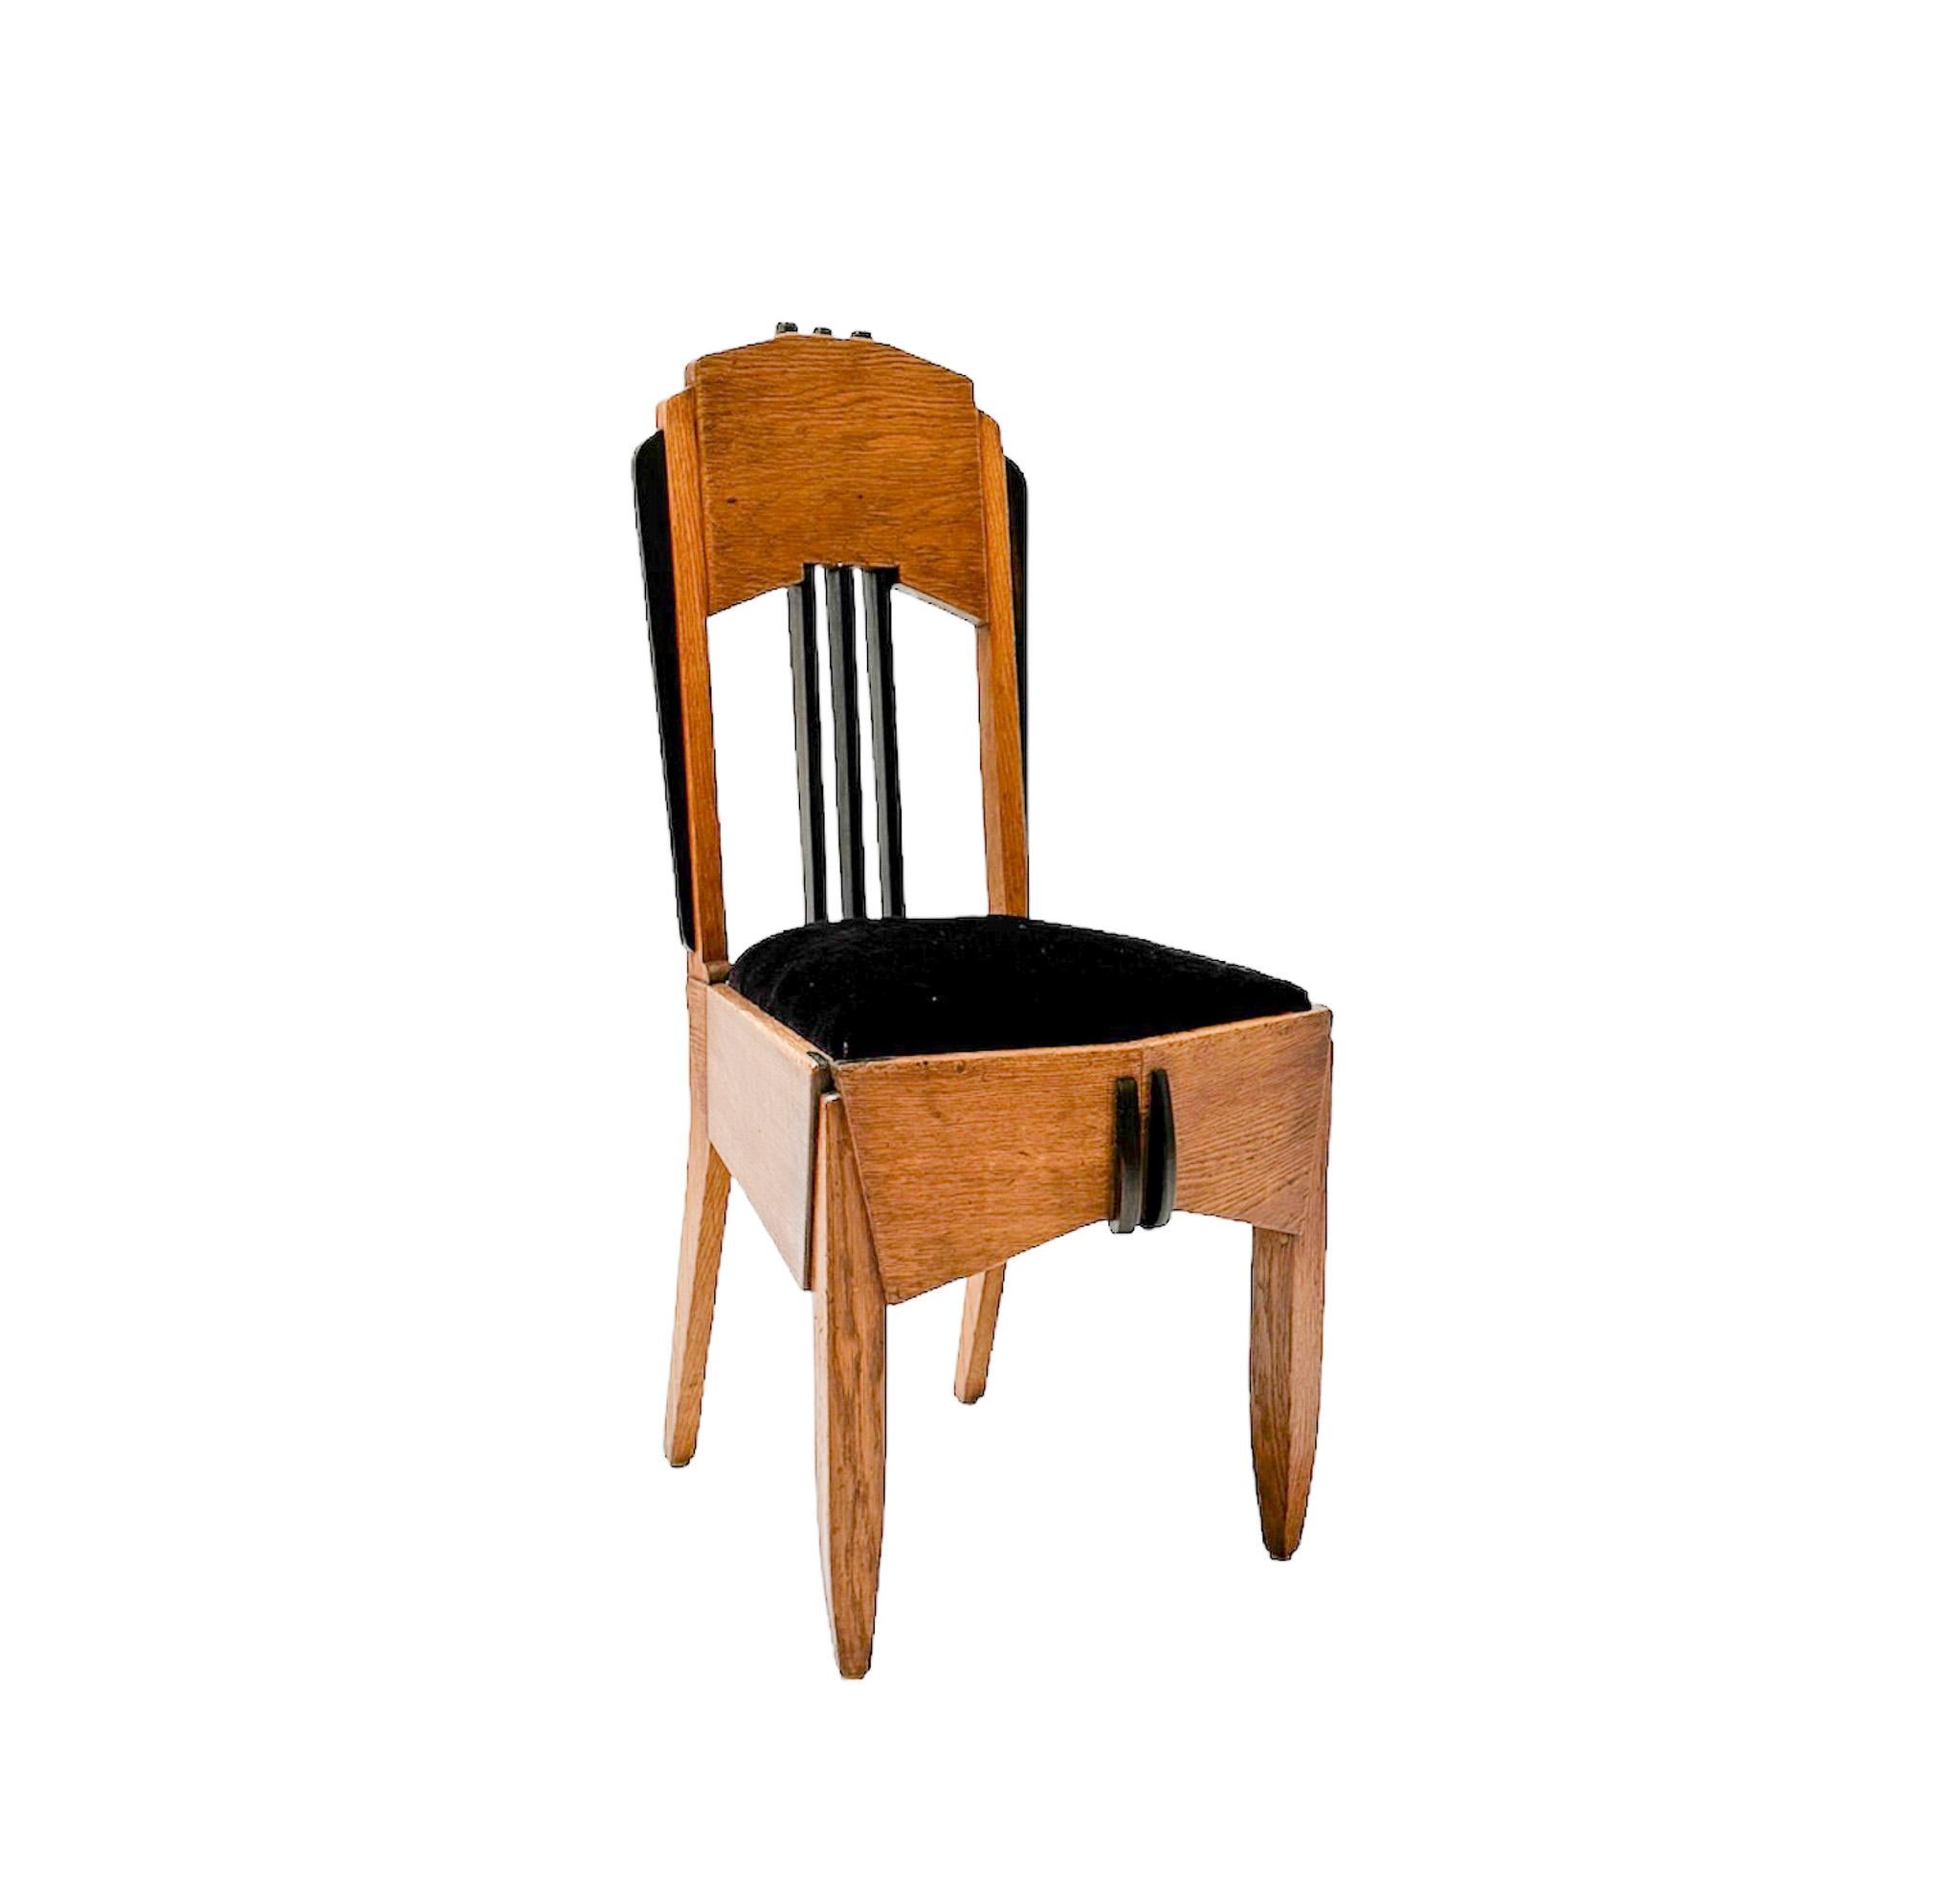 Magnificent and ultra rare Art Deco Amsterdamse School side chair.
Design by Hildo Krop.
Striking Dutch design from the 1920s.
Solid oak frame with original solid macassar ebony elements.
The seat which can be taken out, has still the original dark